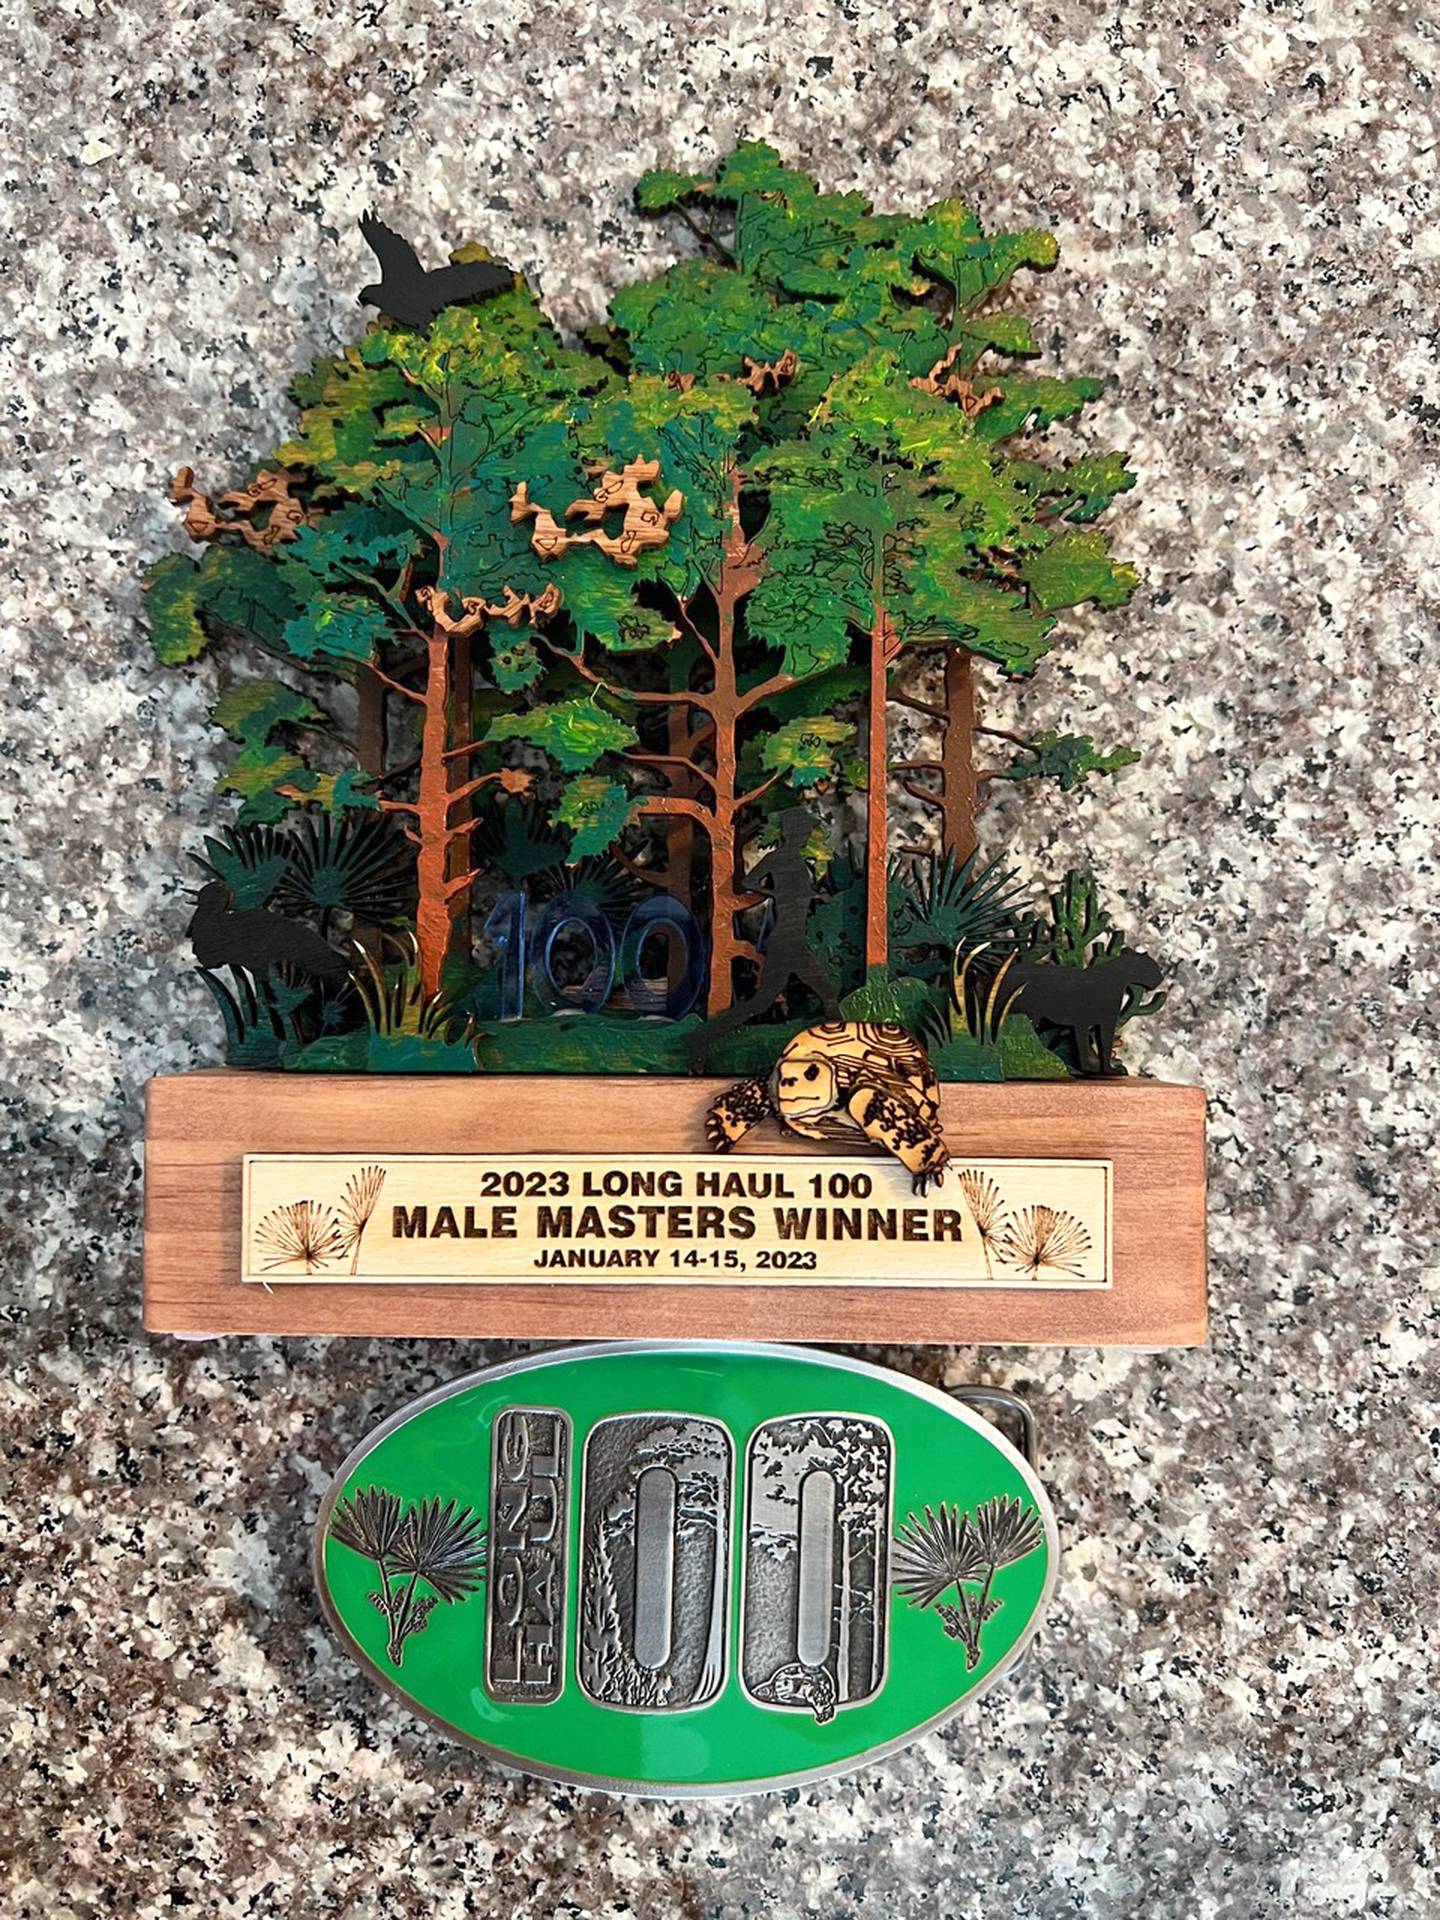 Pictured is the Long Haul 100 award and belt buckle given to all finishers.